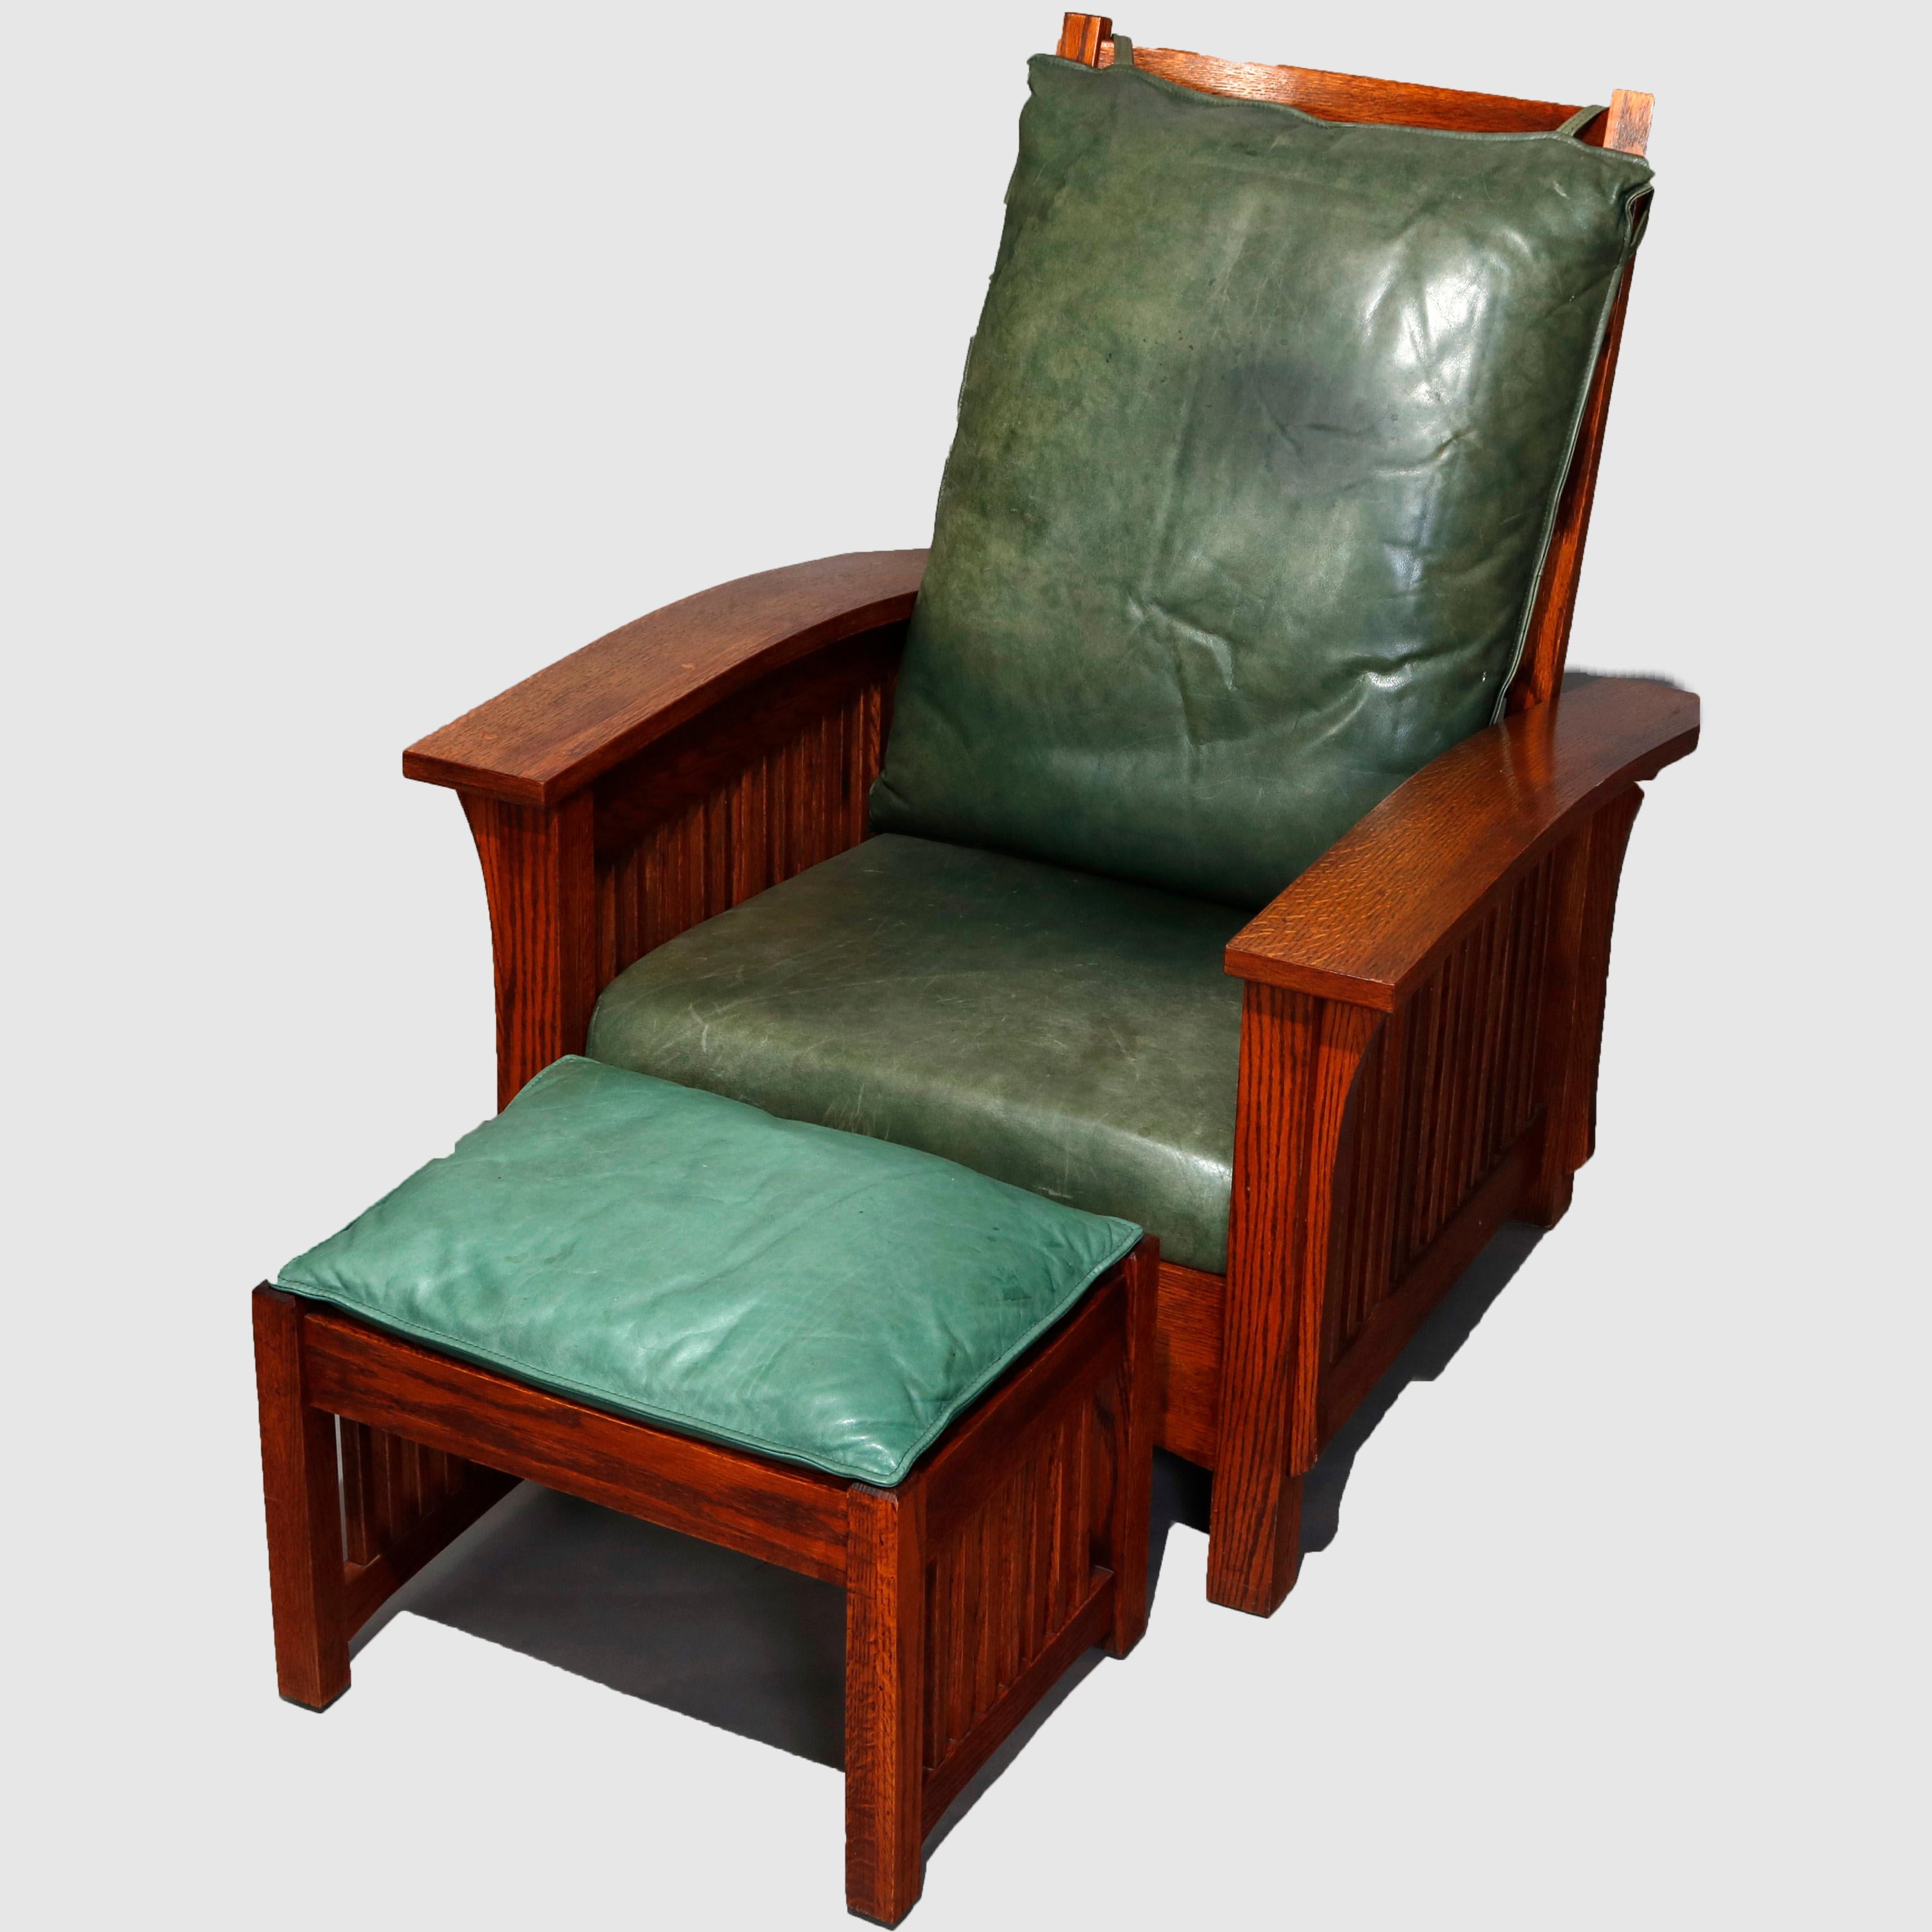 A Mission Oak Morris chair and ottoman in the manner of Stickley Bros. offers reclining back, slat sides and leatherette cushions, 20th century.

Measures - 40.75